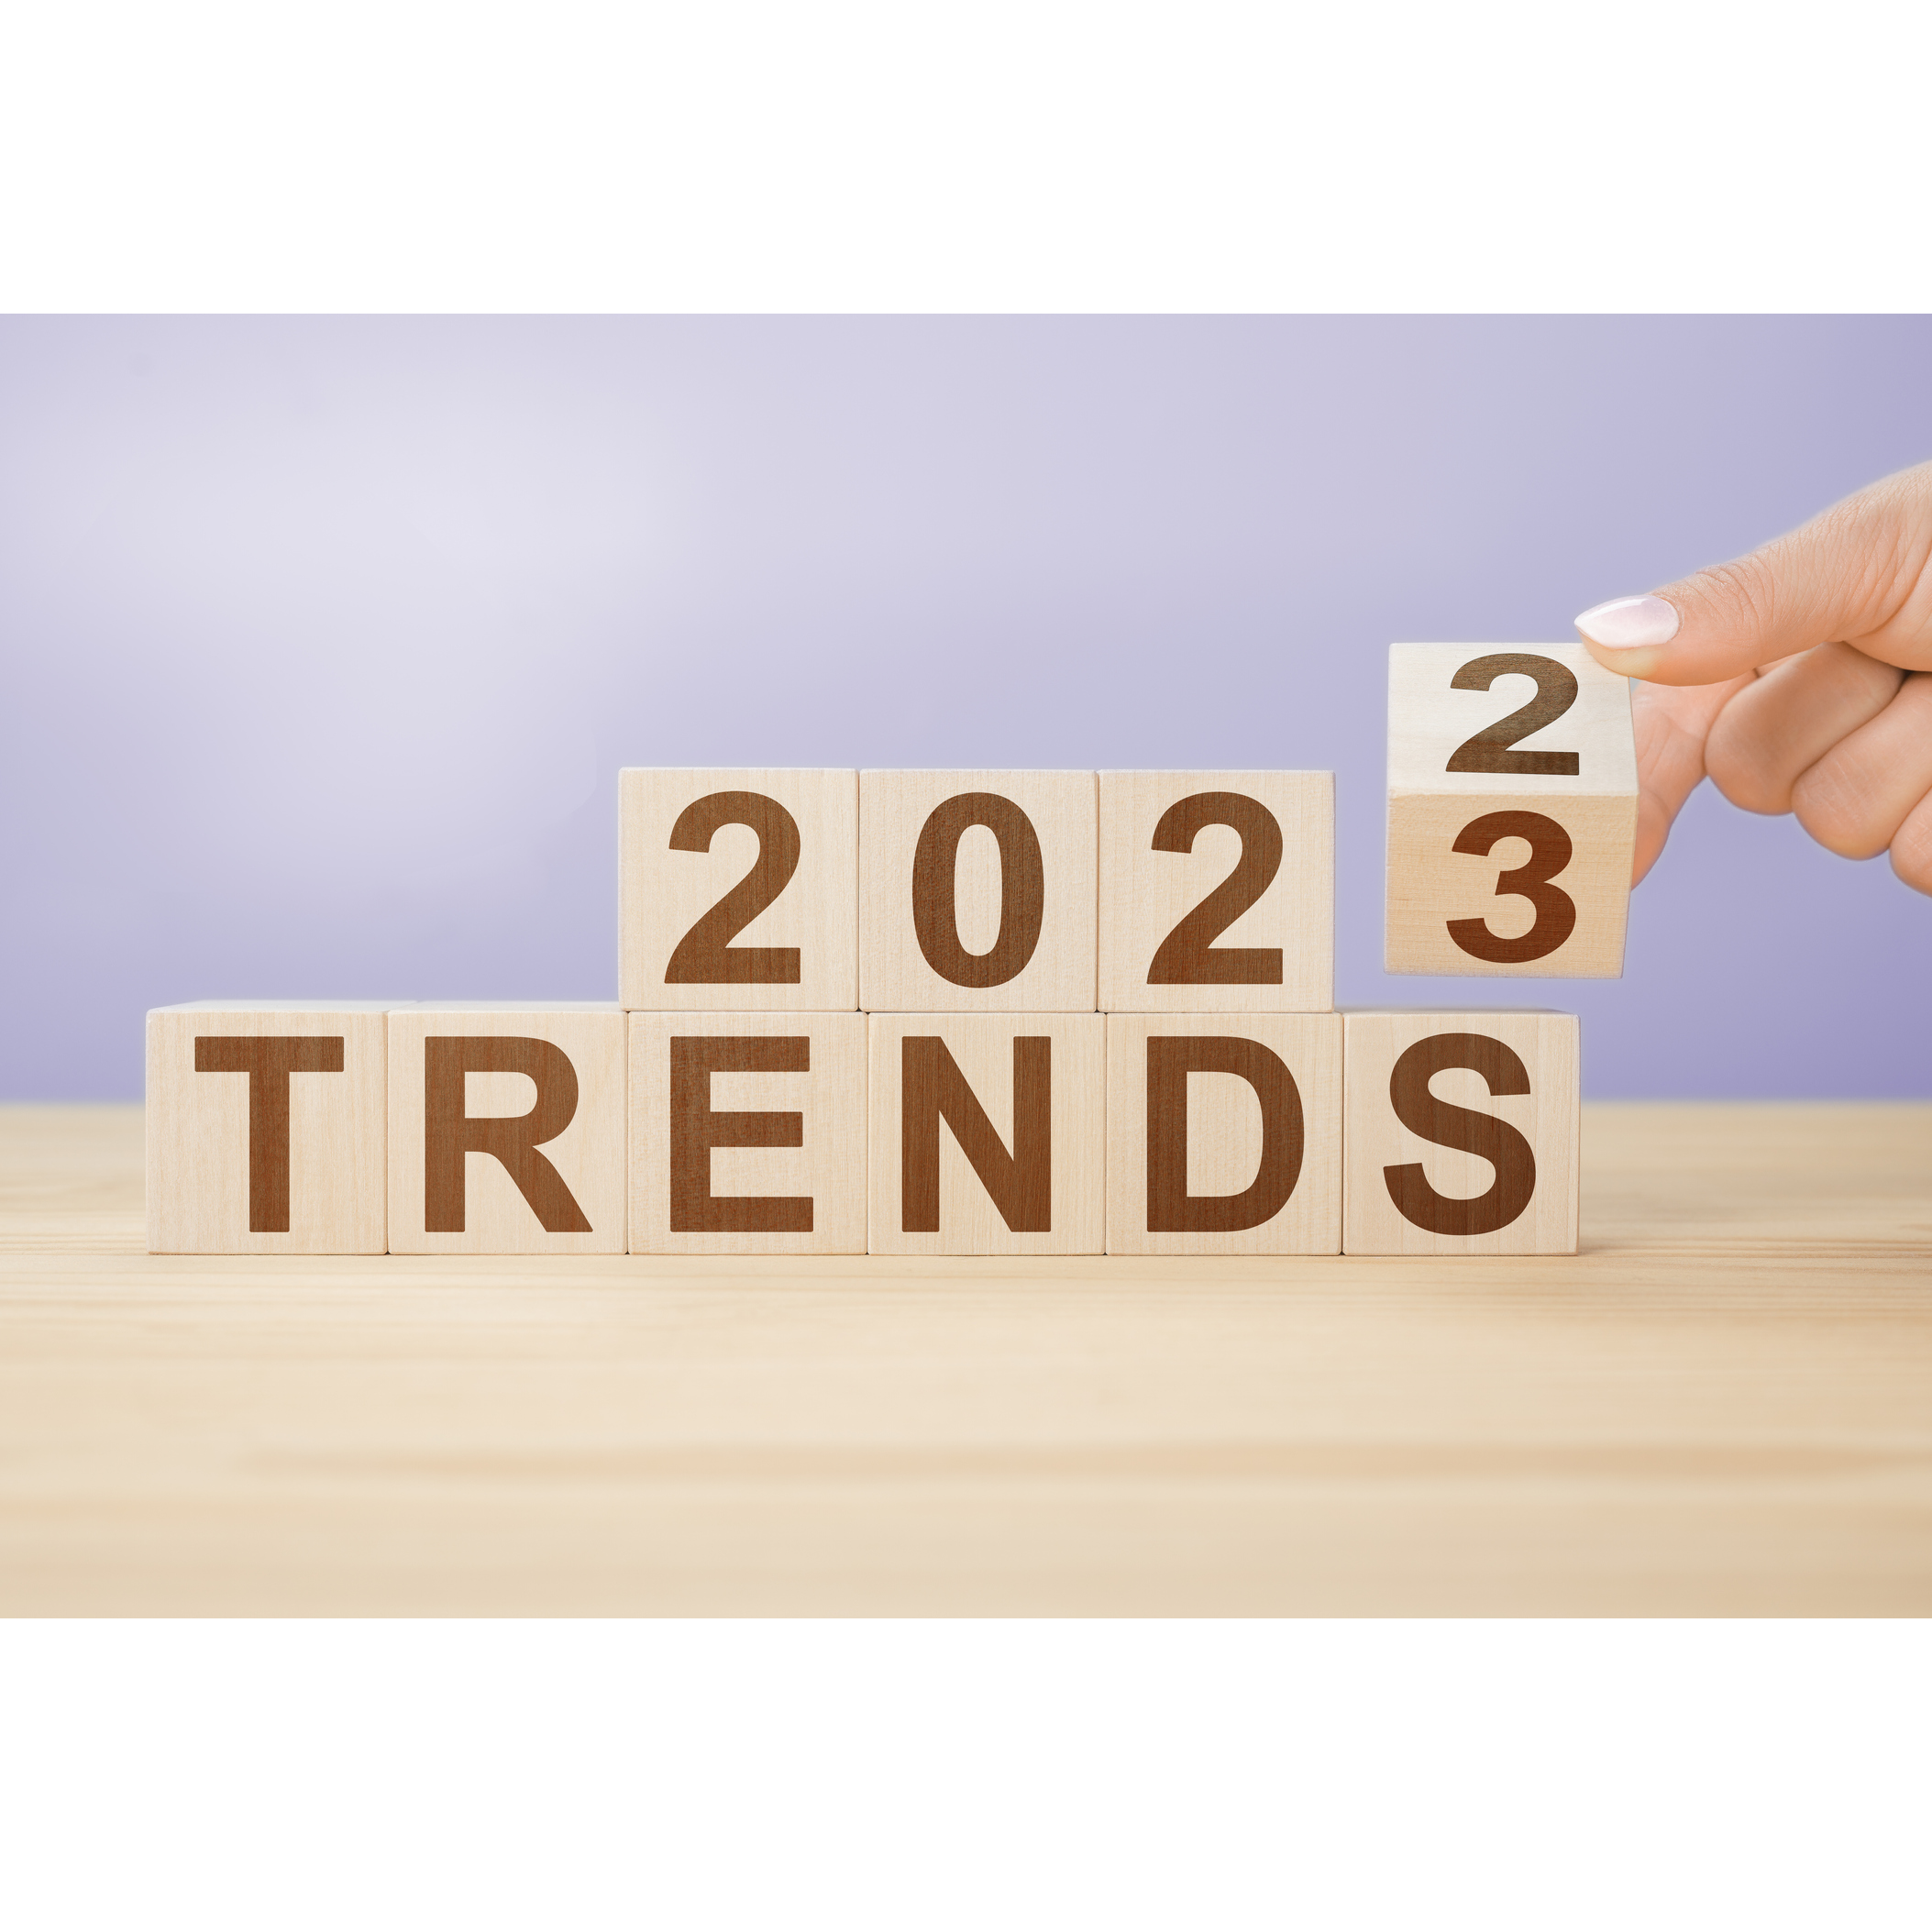 Cover image for  article: Trends and Predictions: What Advertisers Can Expect in 2023